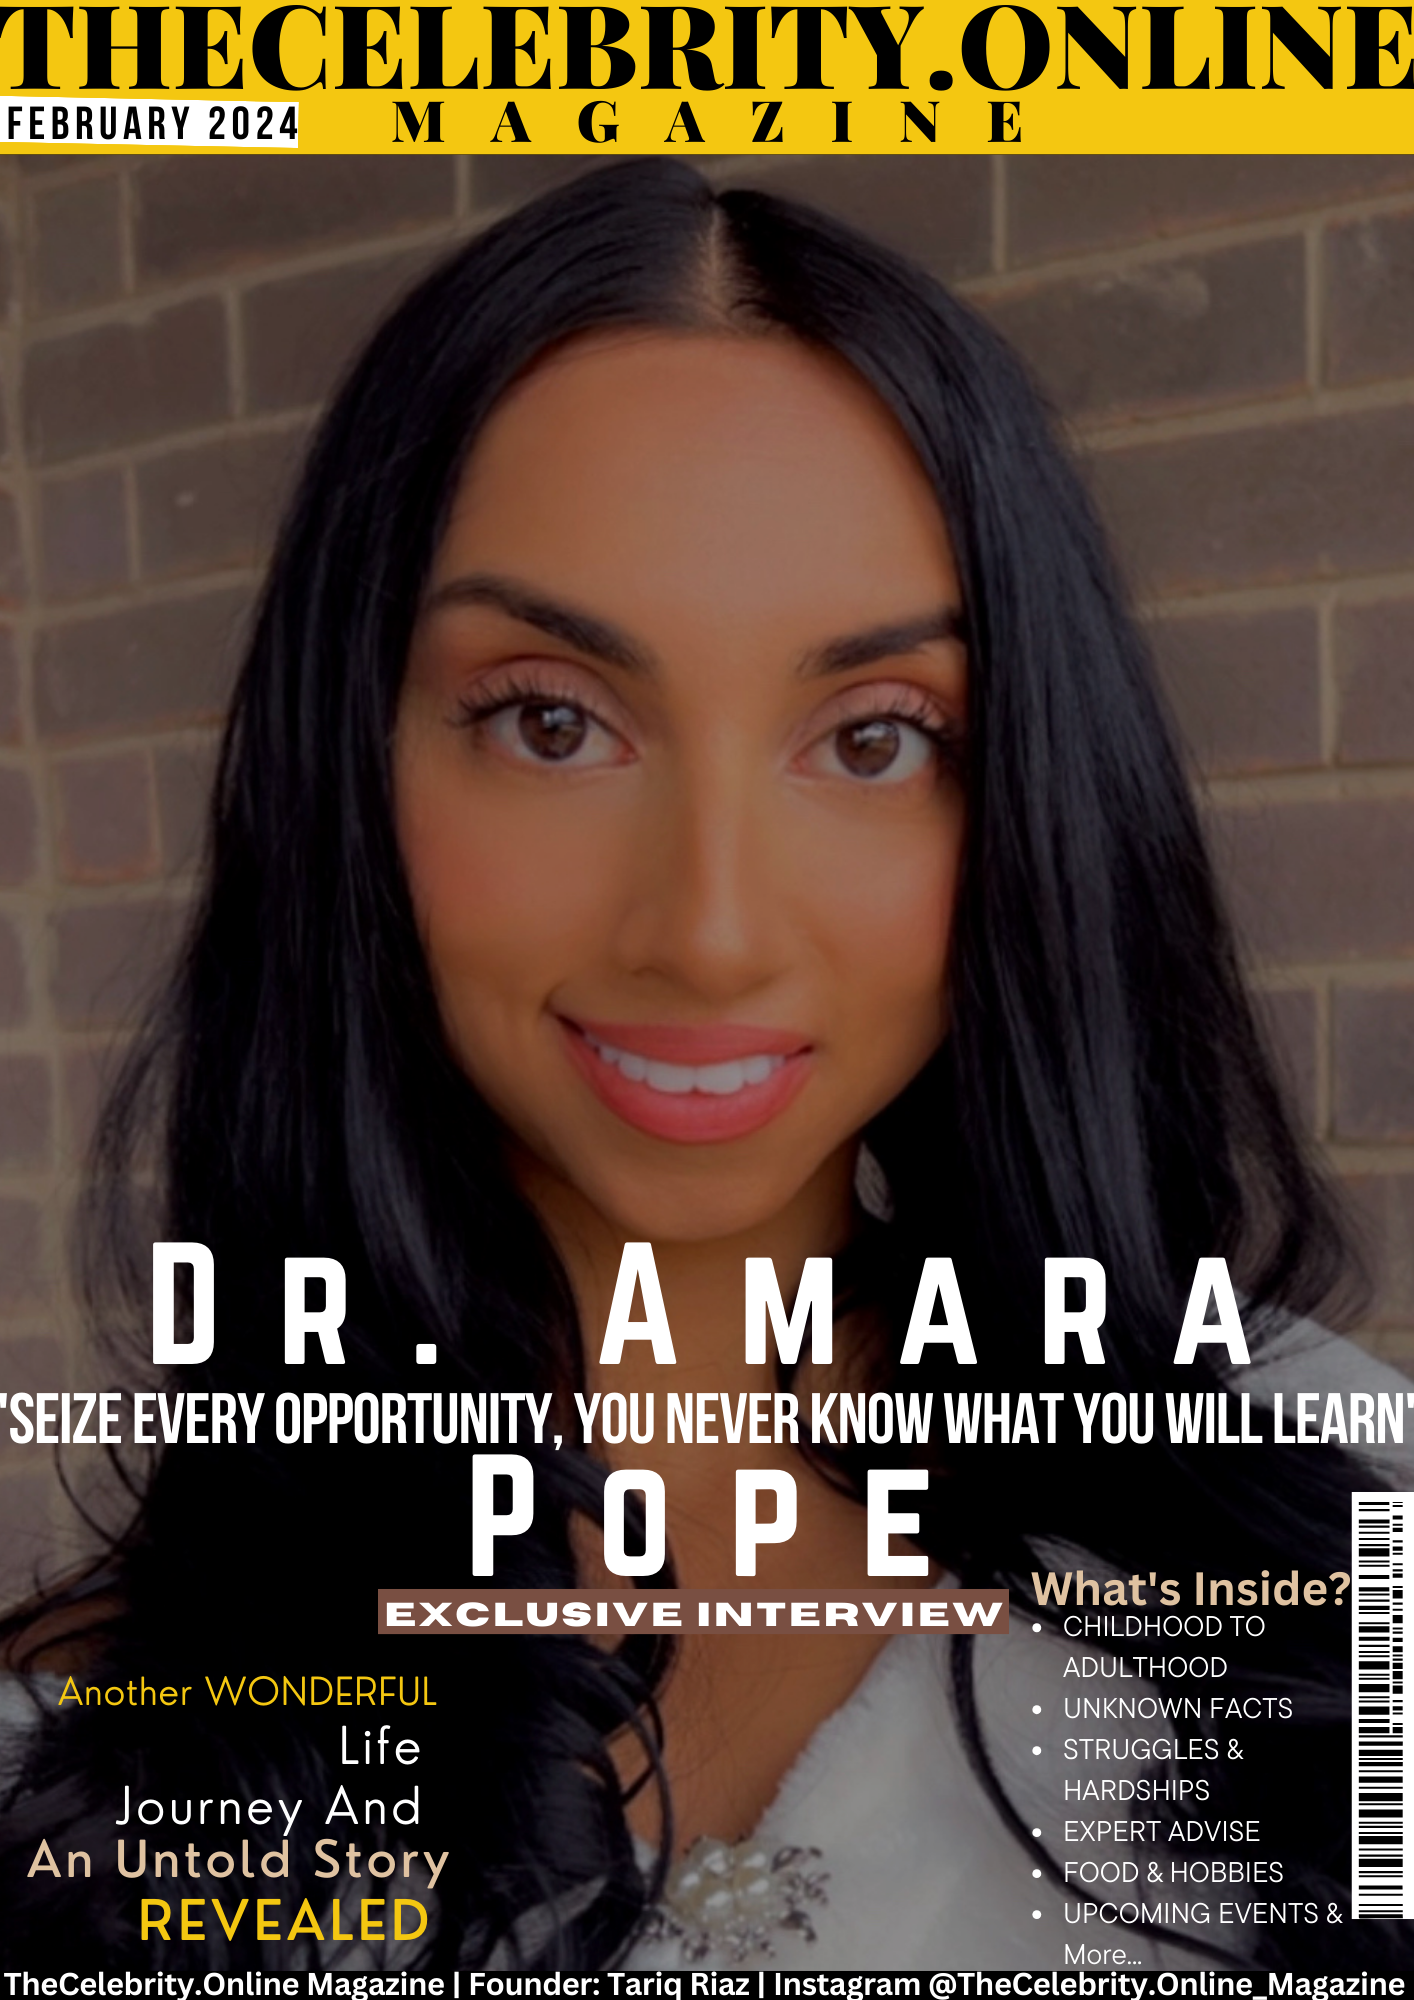 Dr. Amara Pope Exclusive Interview – ‘Seize Every Opportunity. You Never Know What You Will Learn’